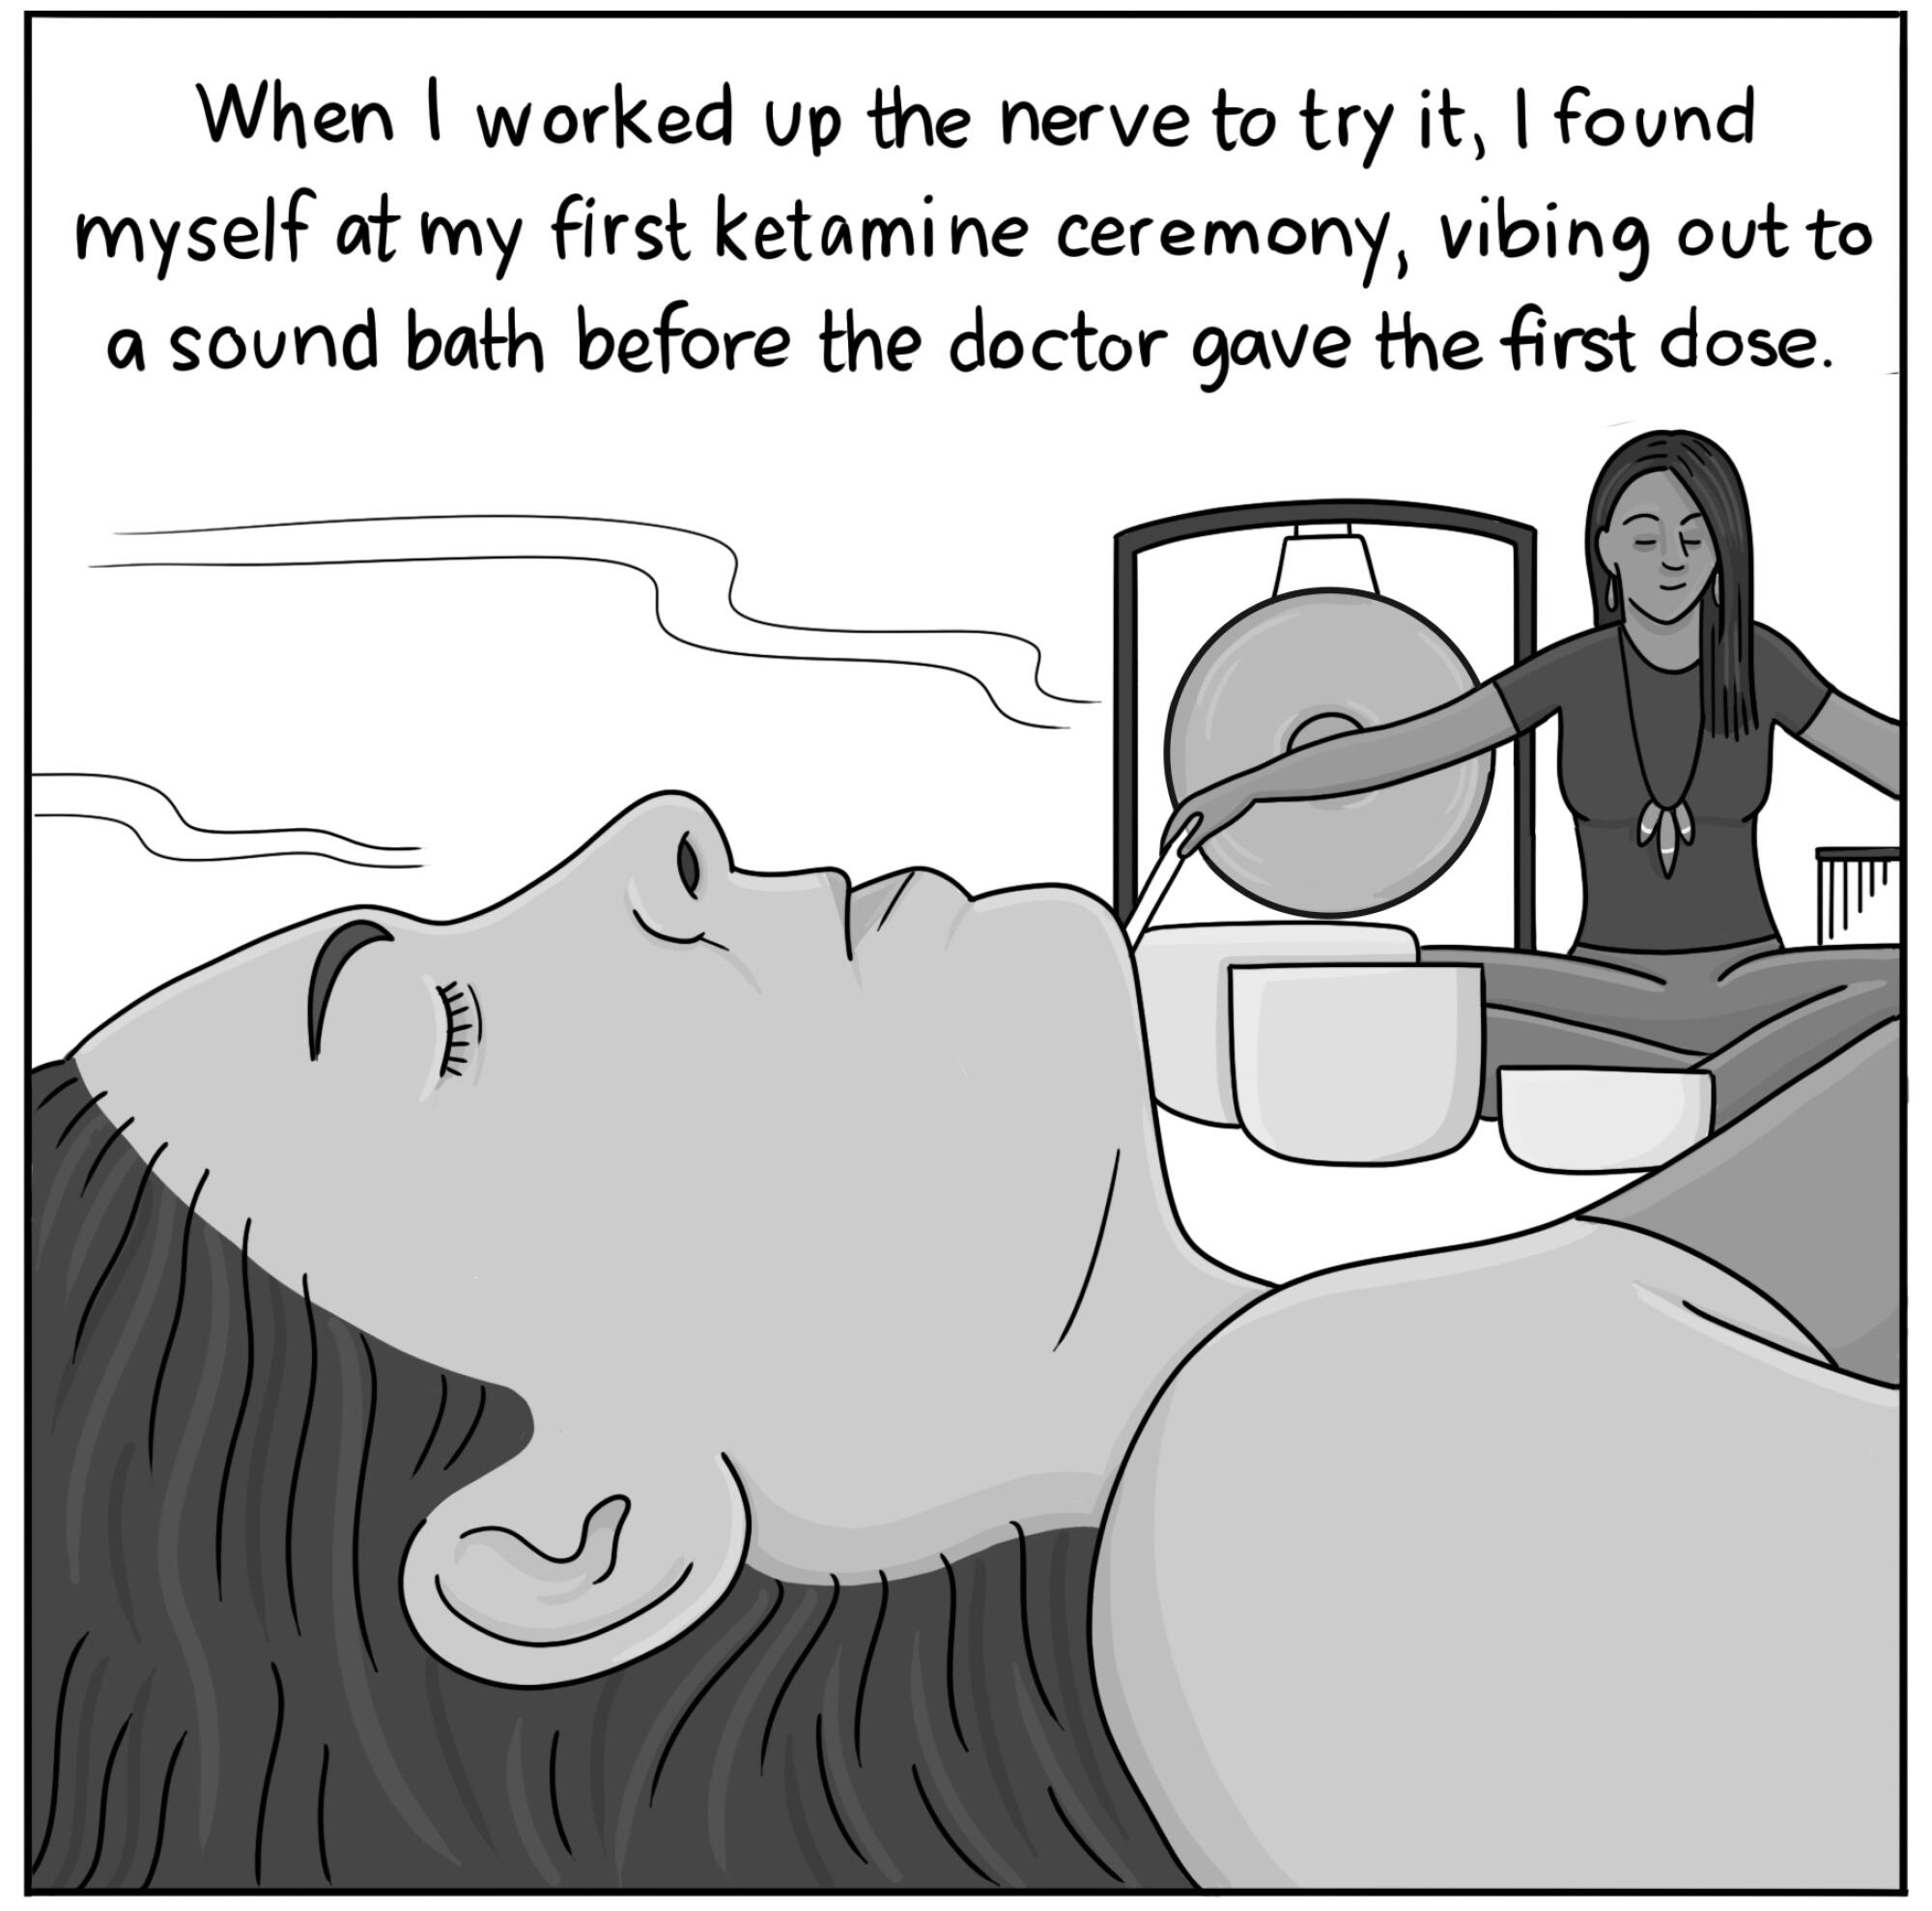 I worked up the nerve to try it. At my first ketamine ceremony, I vibed out to a sound bath before the doctor gave the dose.